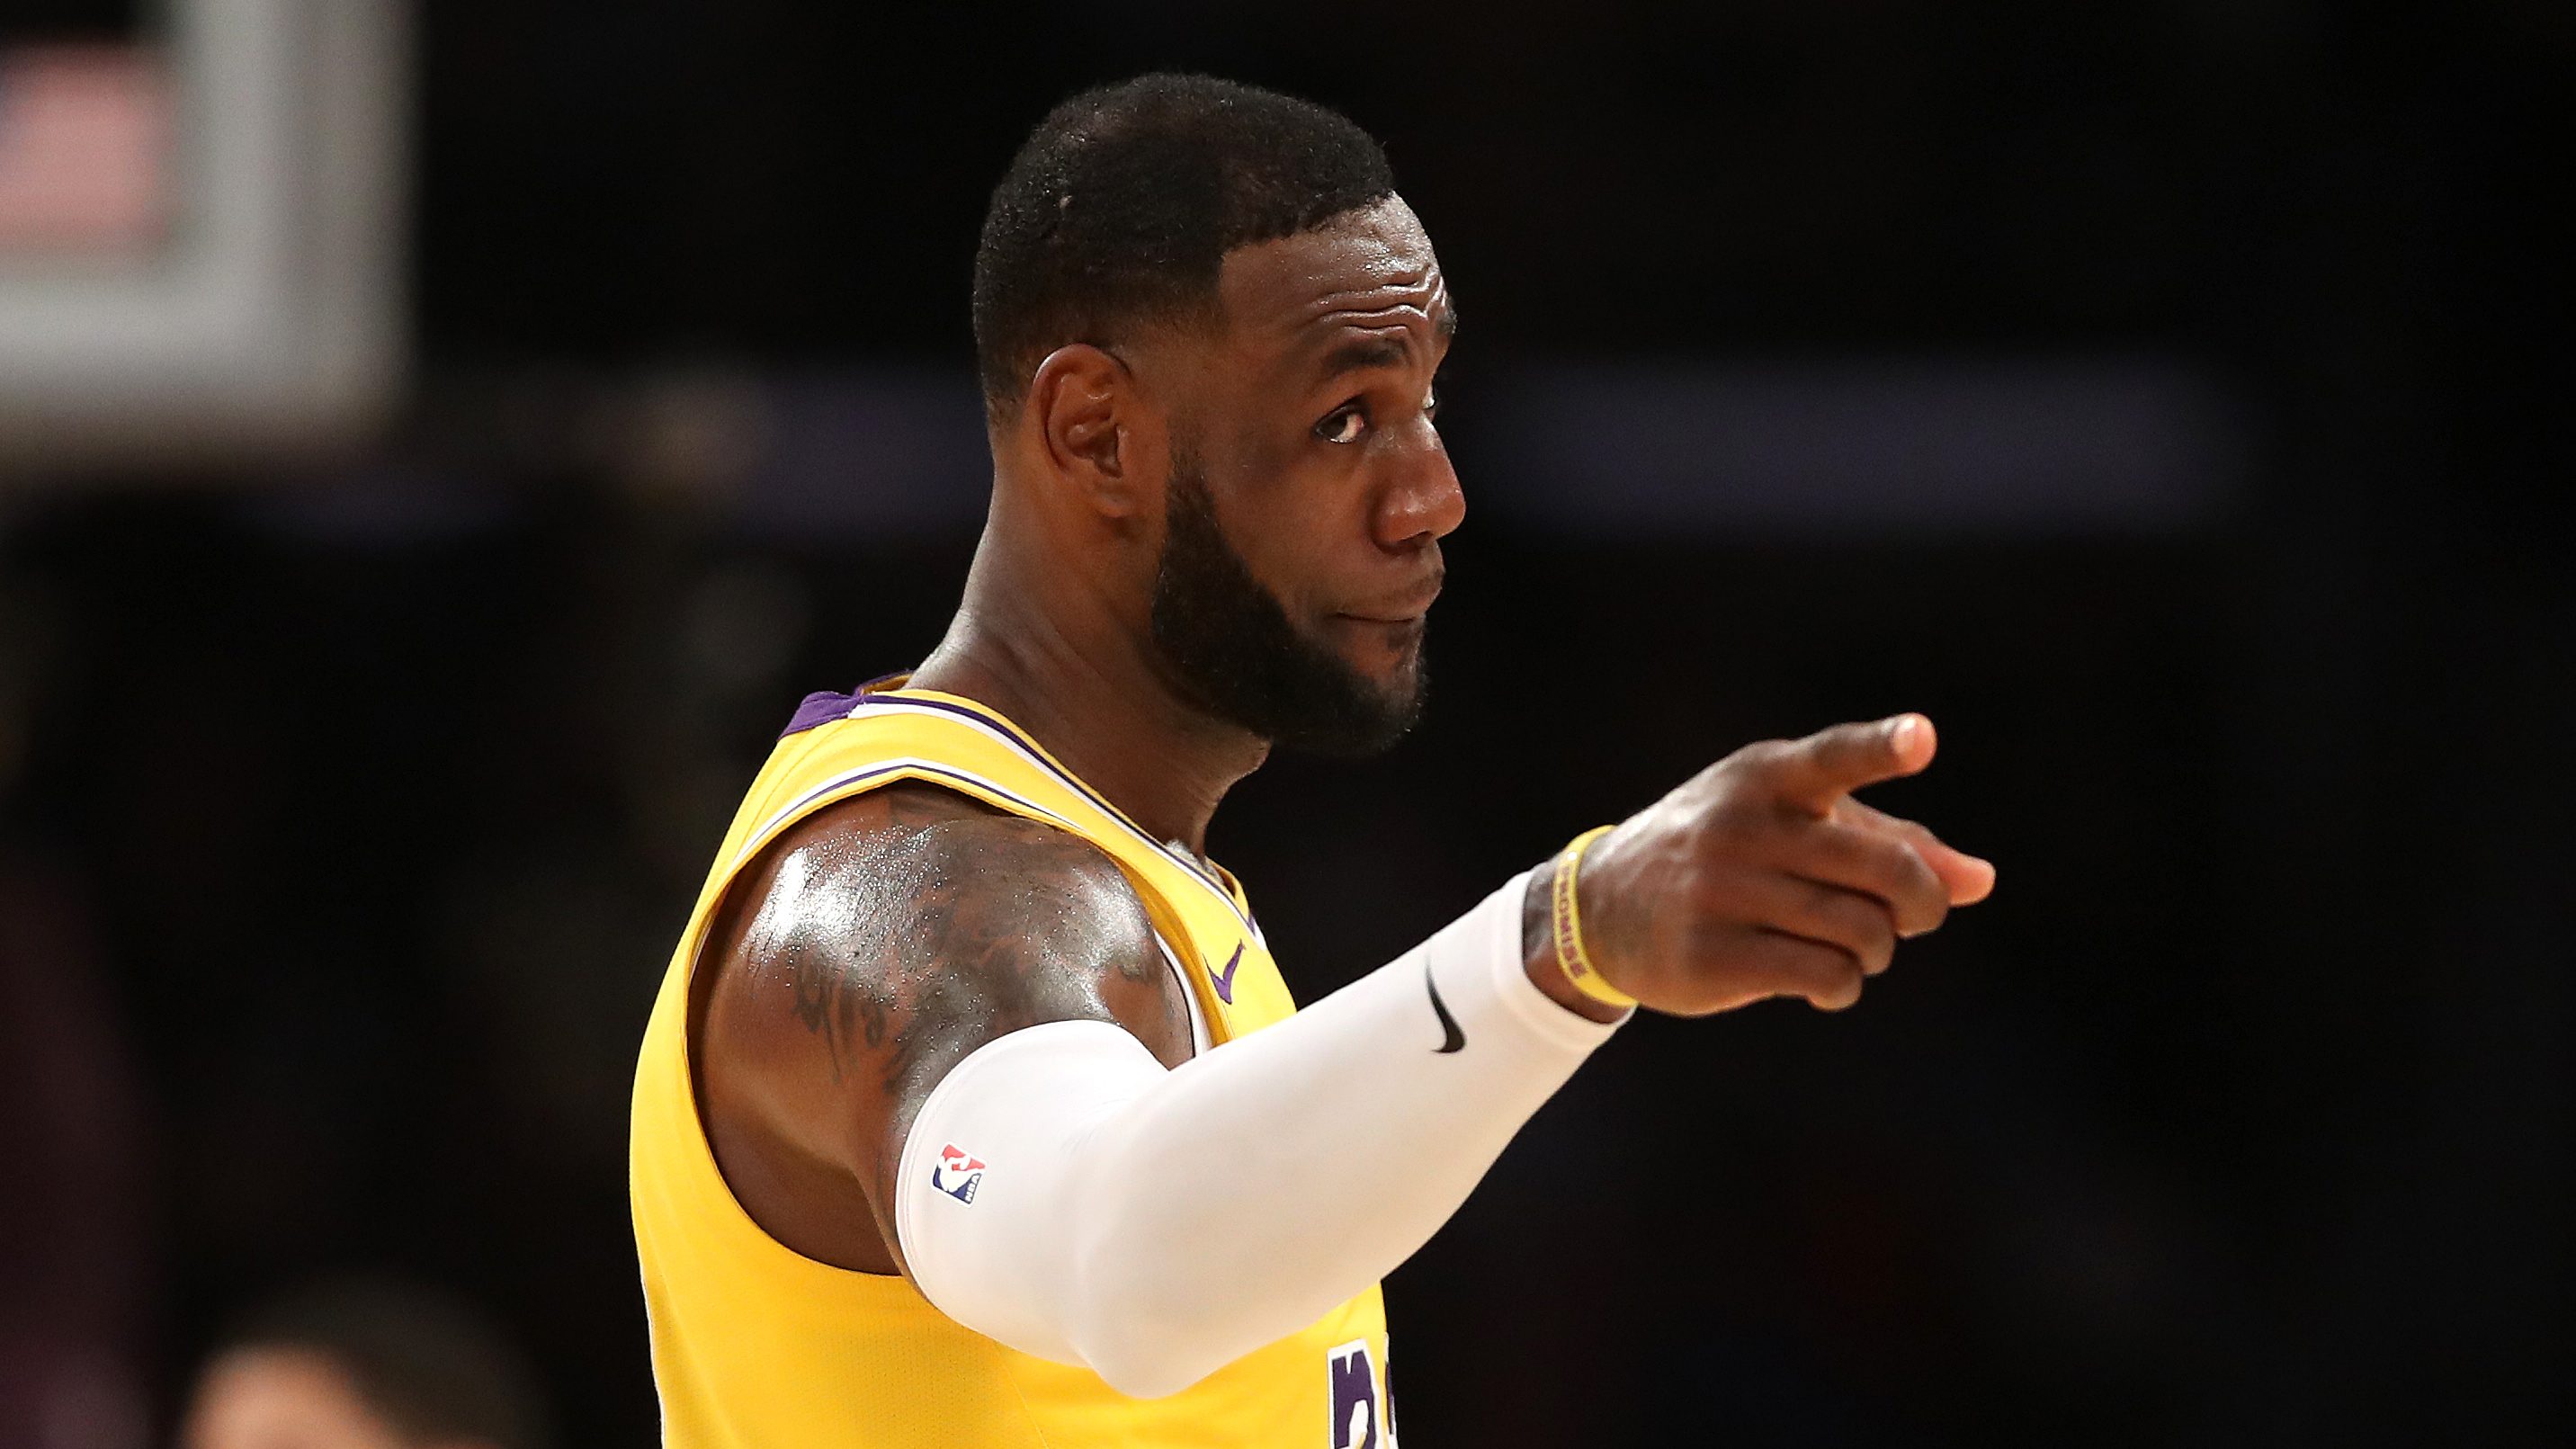 Lebron James calls for justice in Breonna Taylor case during